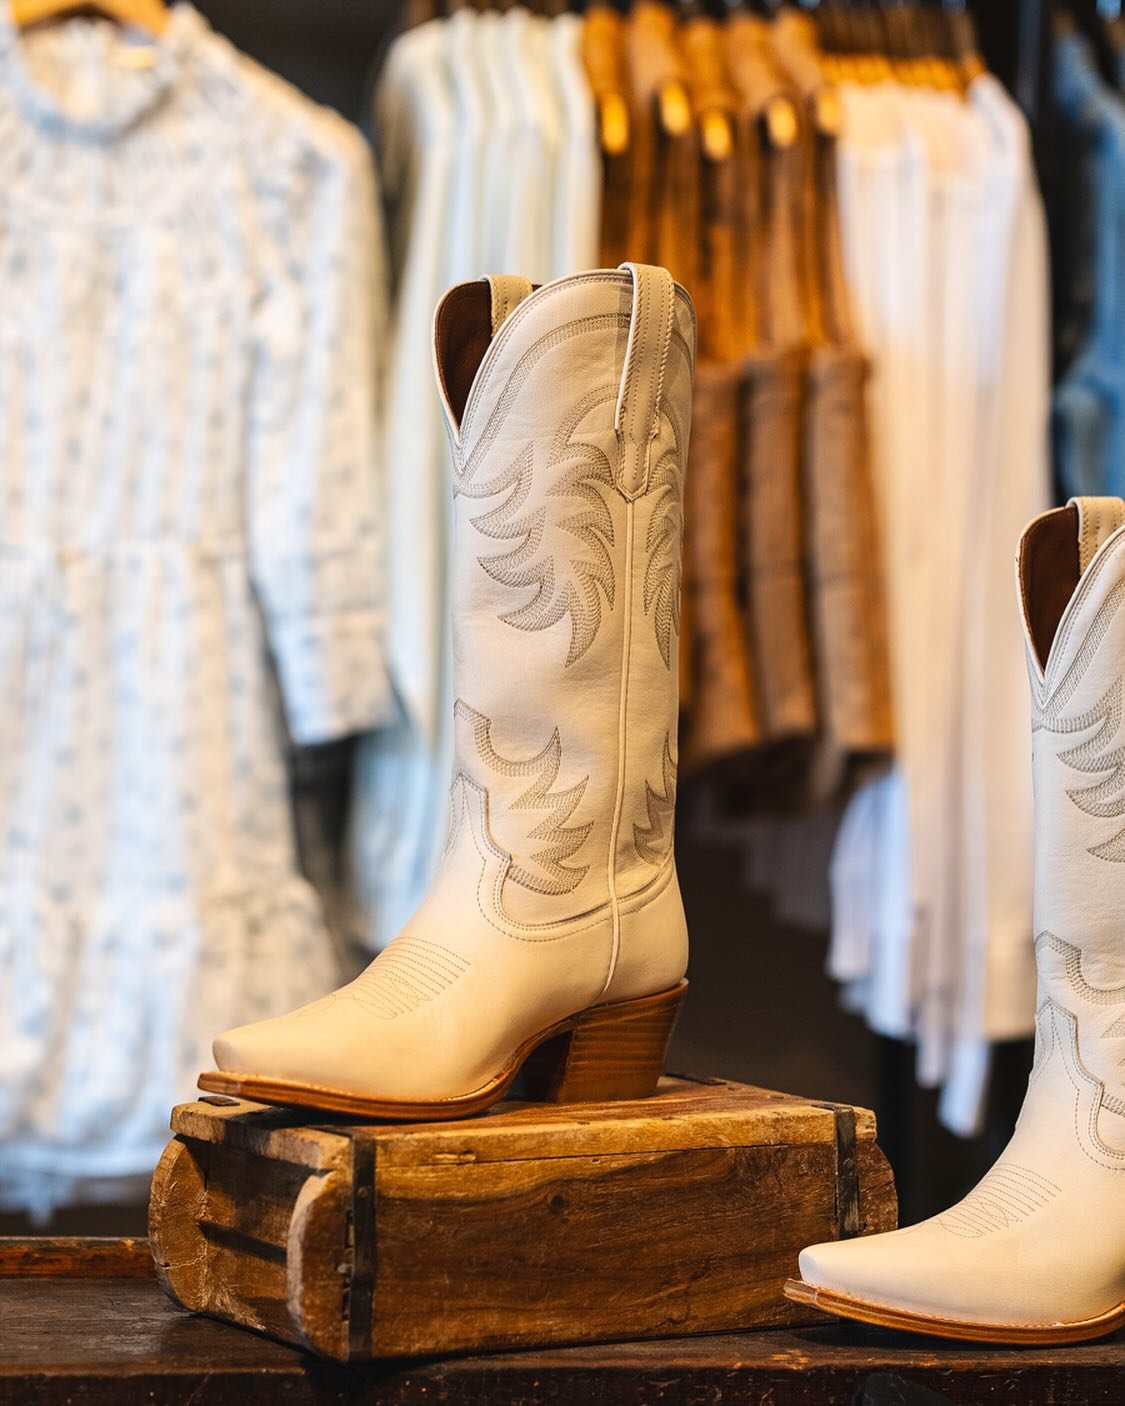 Step into outdoor concert season with the perfect pair of boots! 🤠🎸☀️ @tecovas